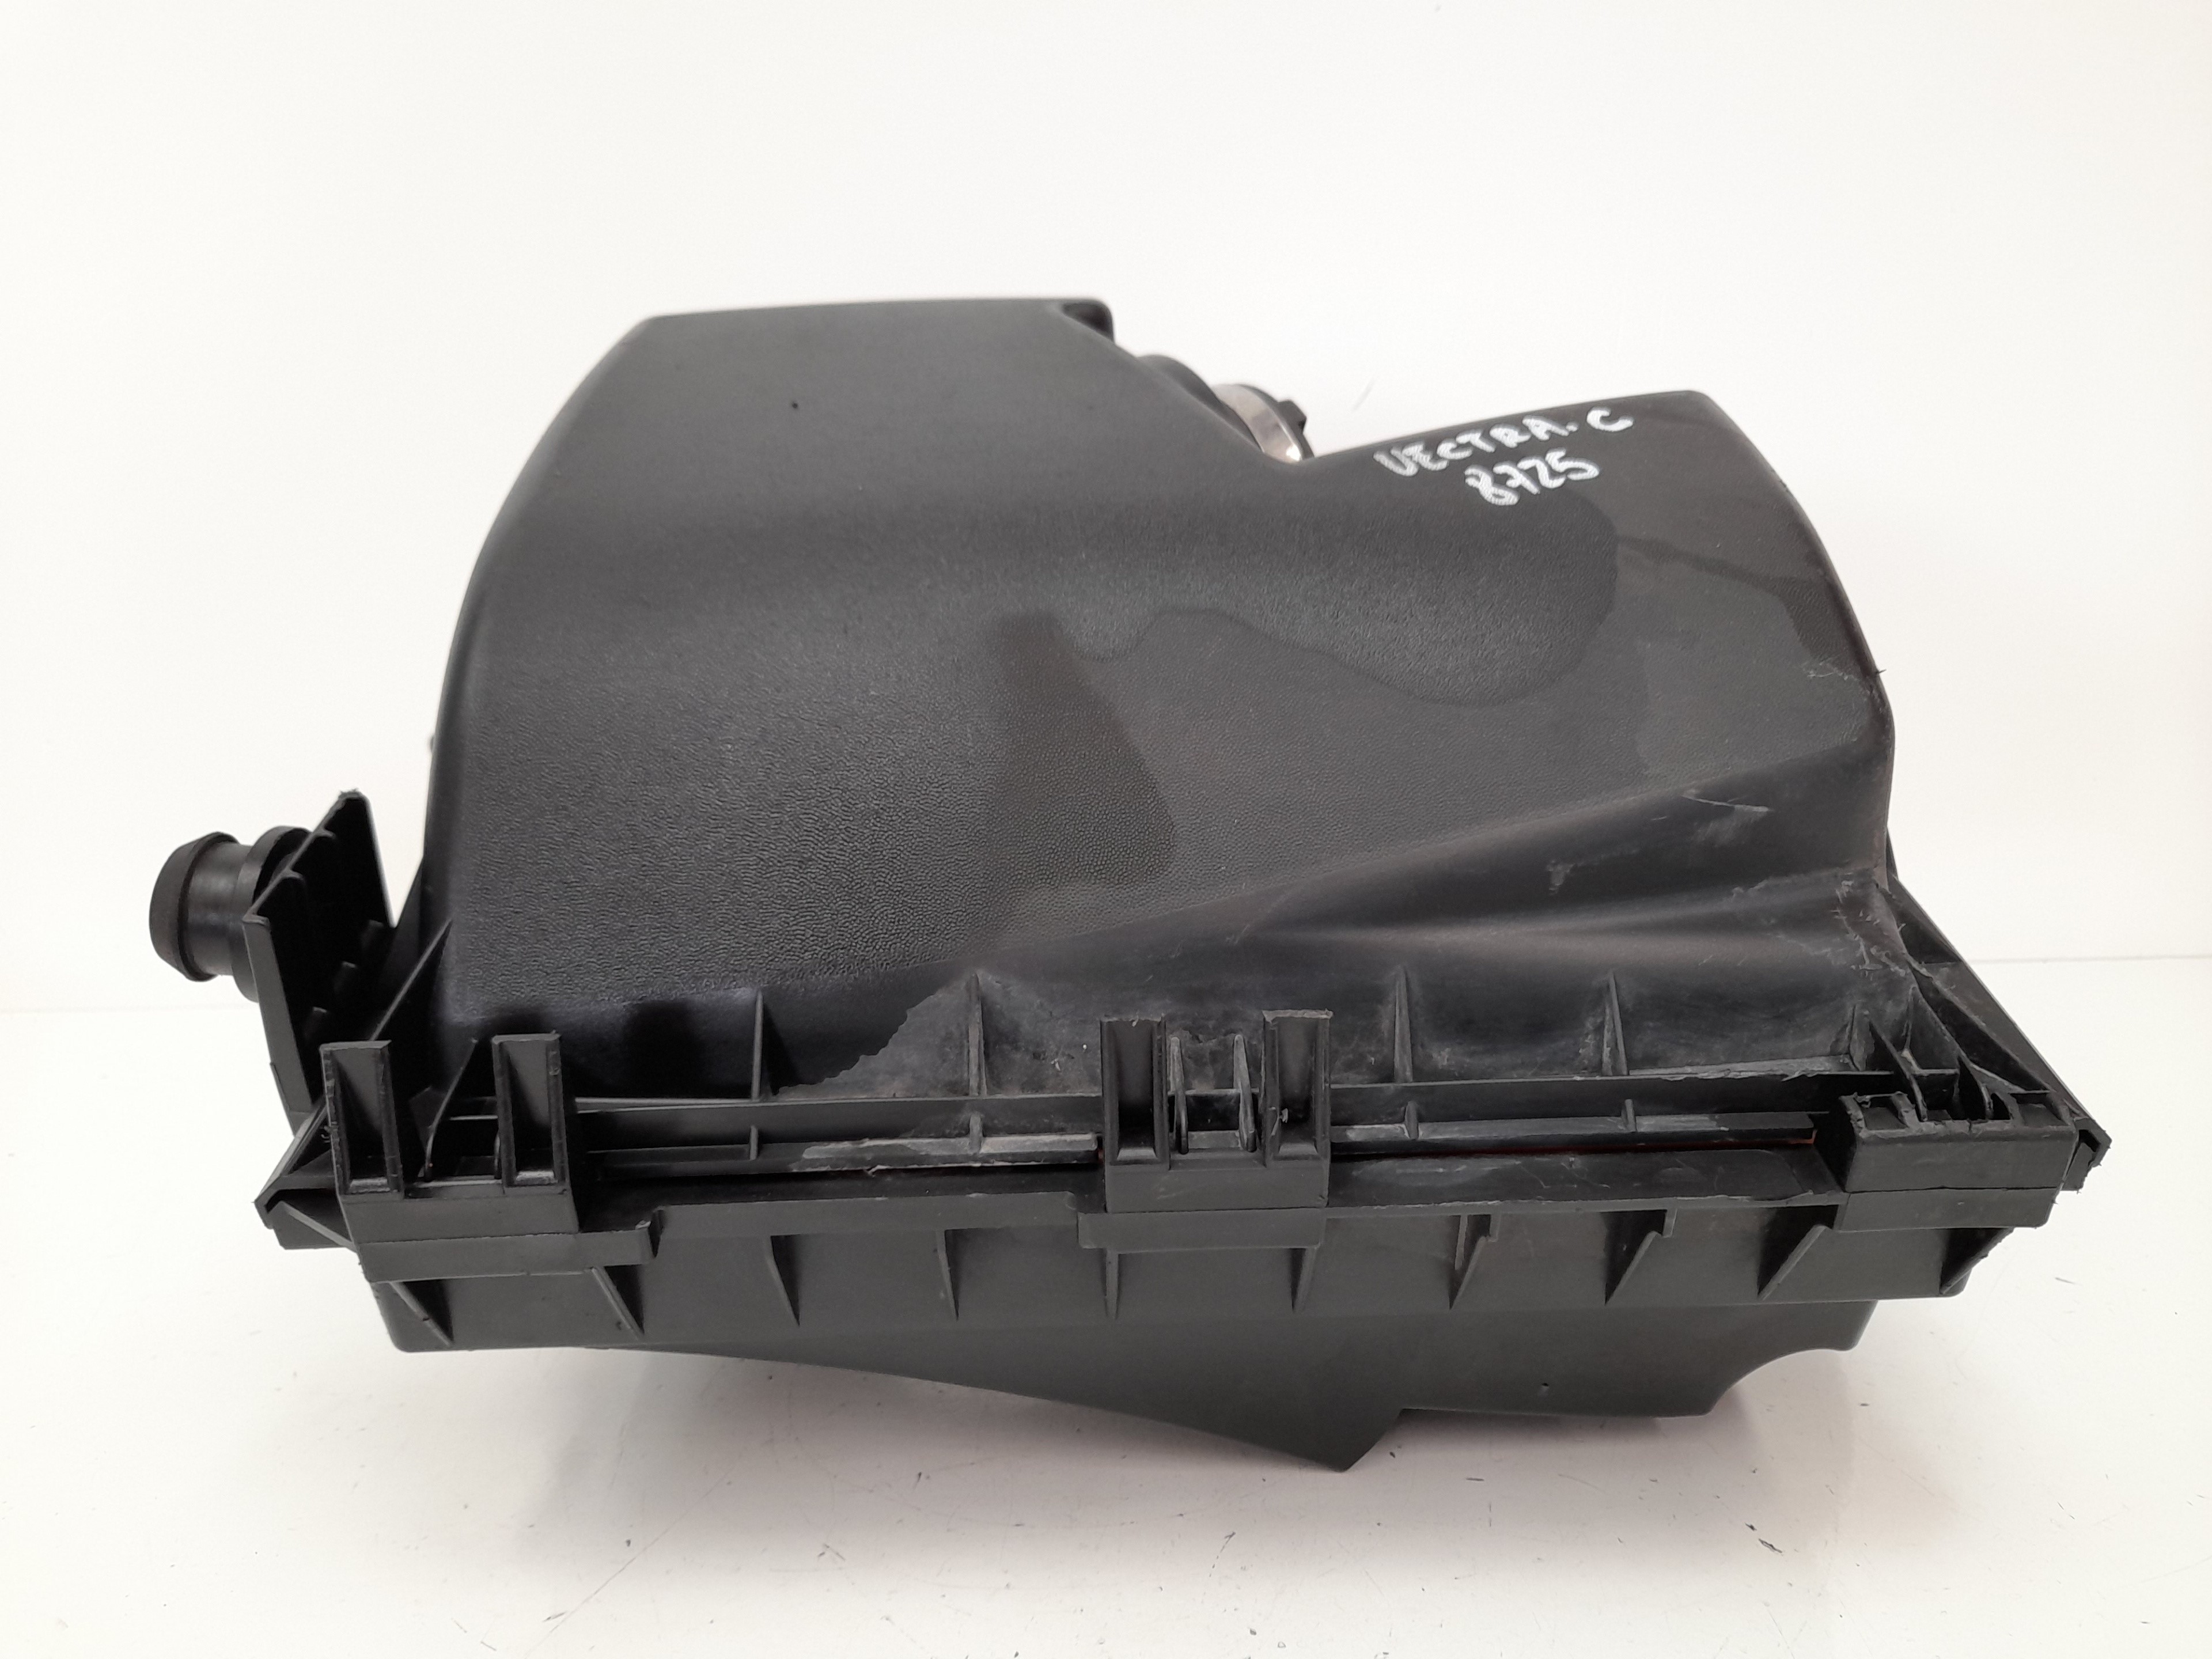 OPEL Vectra Other Engine Compartment Parts 55350912 24113550